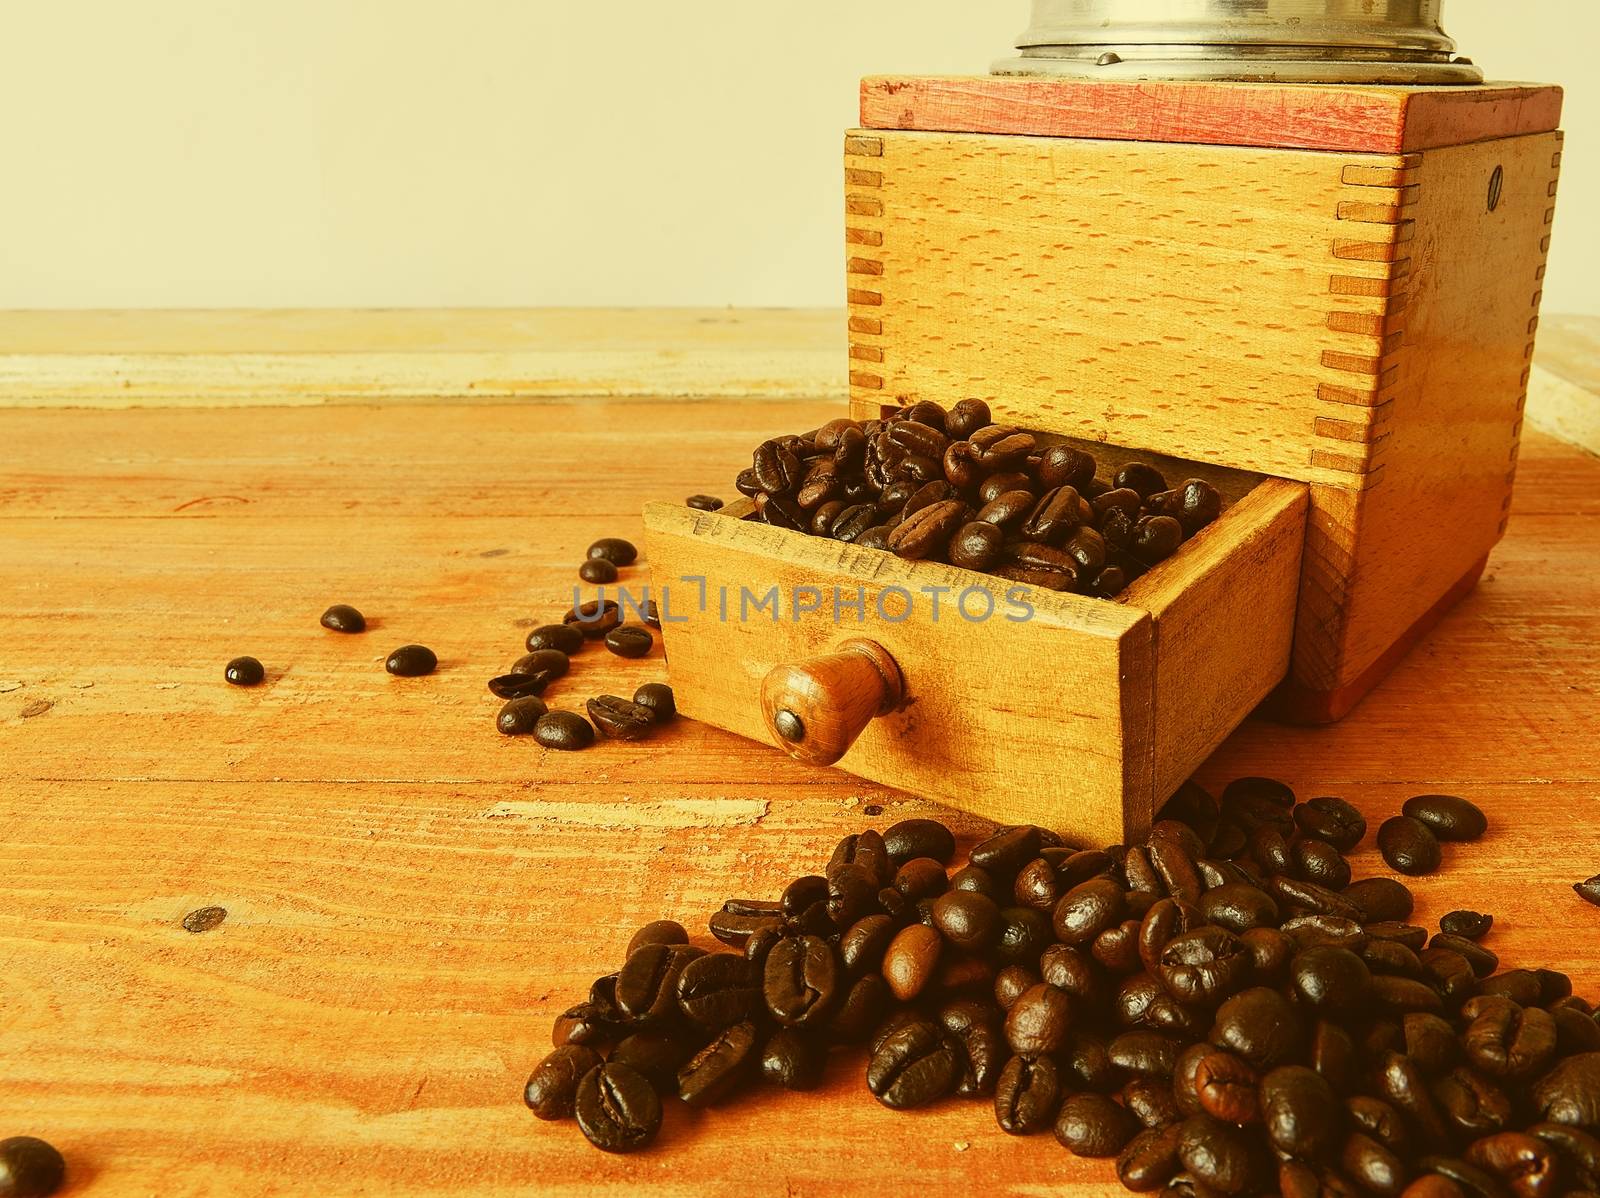 Vintage coffee mill and coffee beans on wooden background by roman_nerud